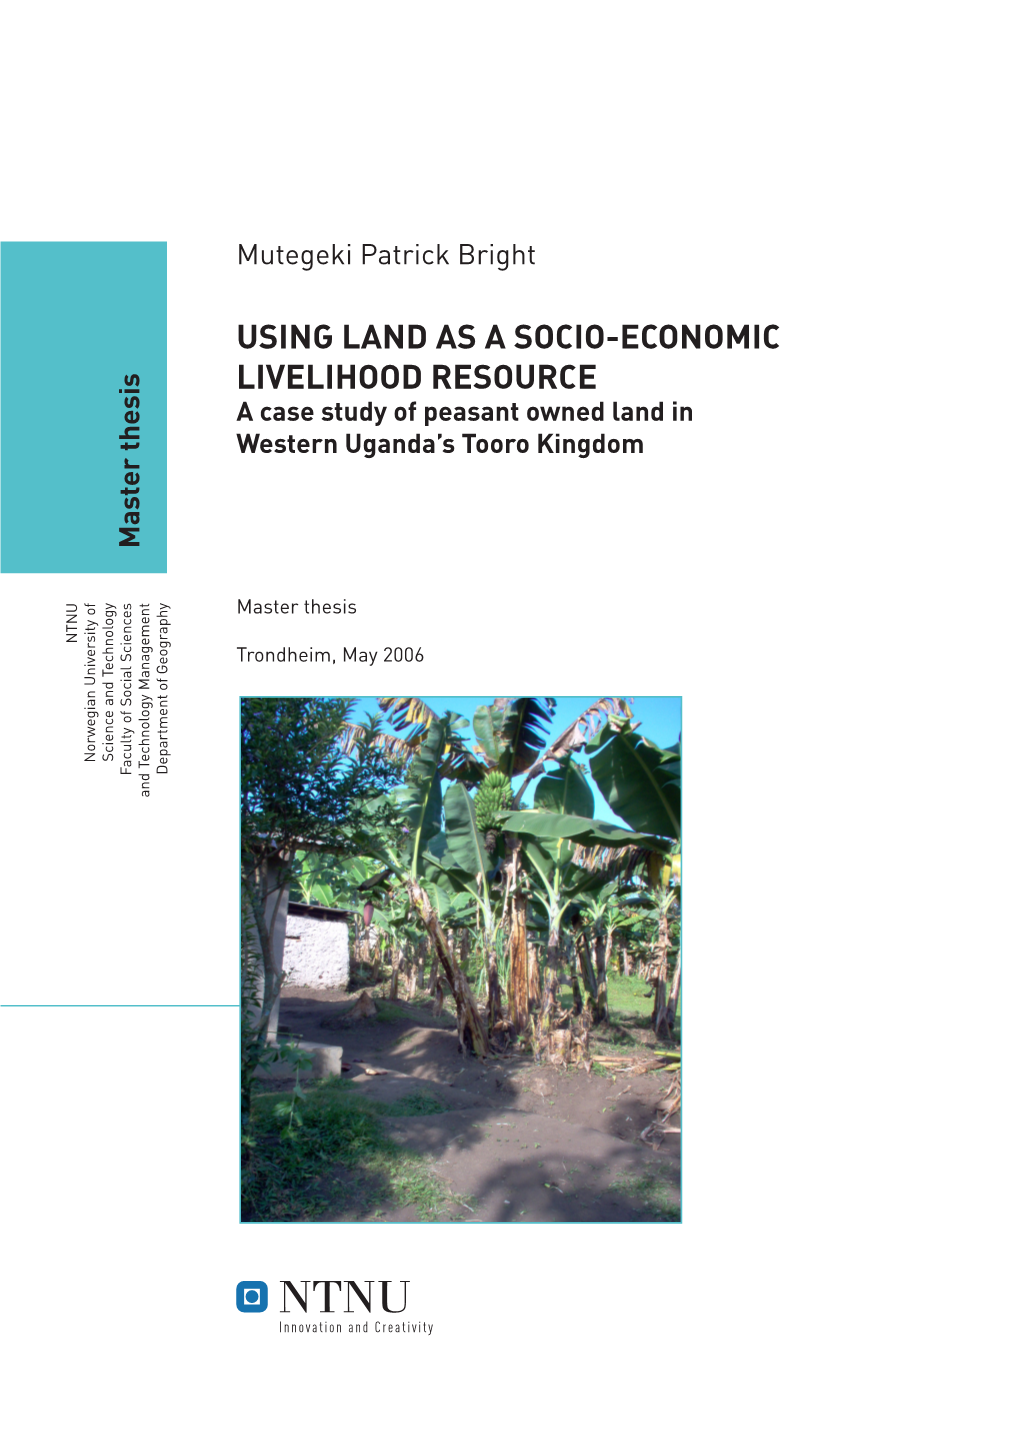 USING LAND AS a SOCIO-ECONOMIC LIVELIHOOD RESOURCE a Case Study of Peasant Owned Land in Western Uganda’S Tooro Kingdom